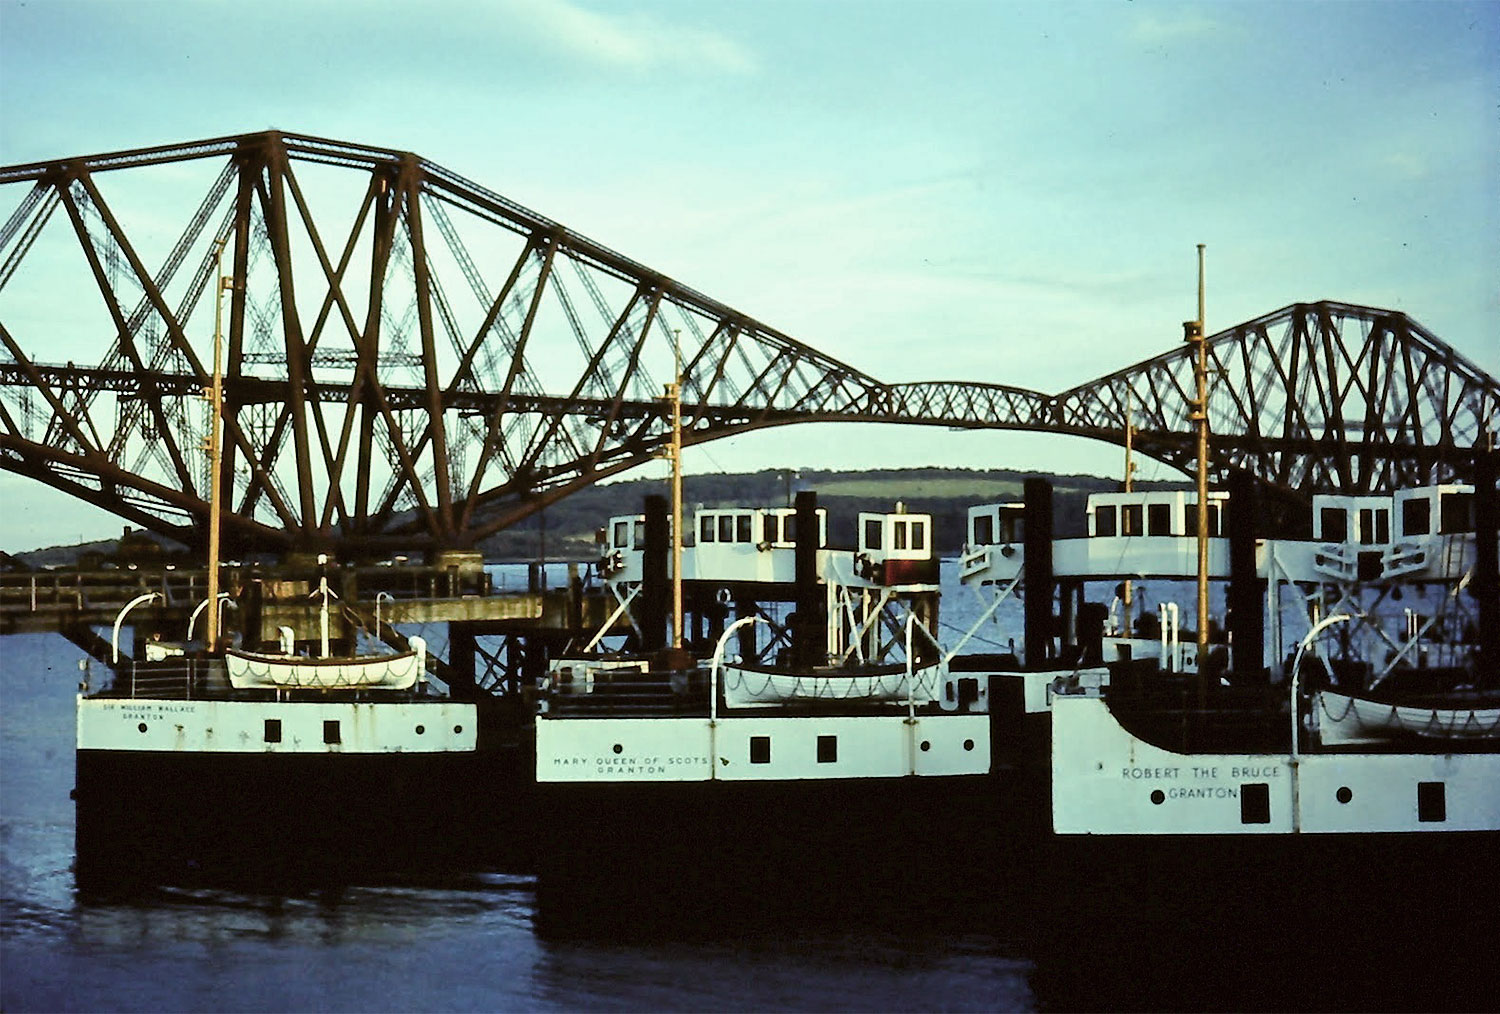 Ferries from the Queensferry Crossing, berthed at North Queensferry, following the opening of the Forth Road Bridge in 1964